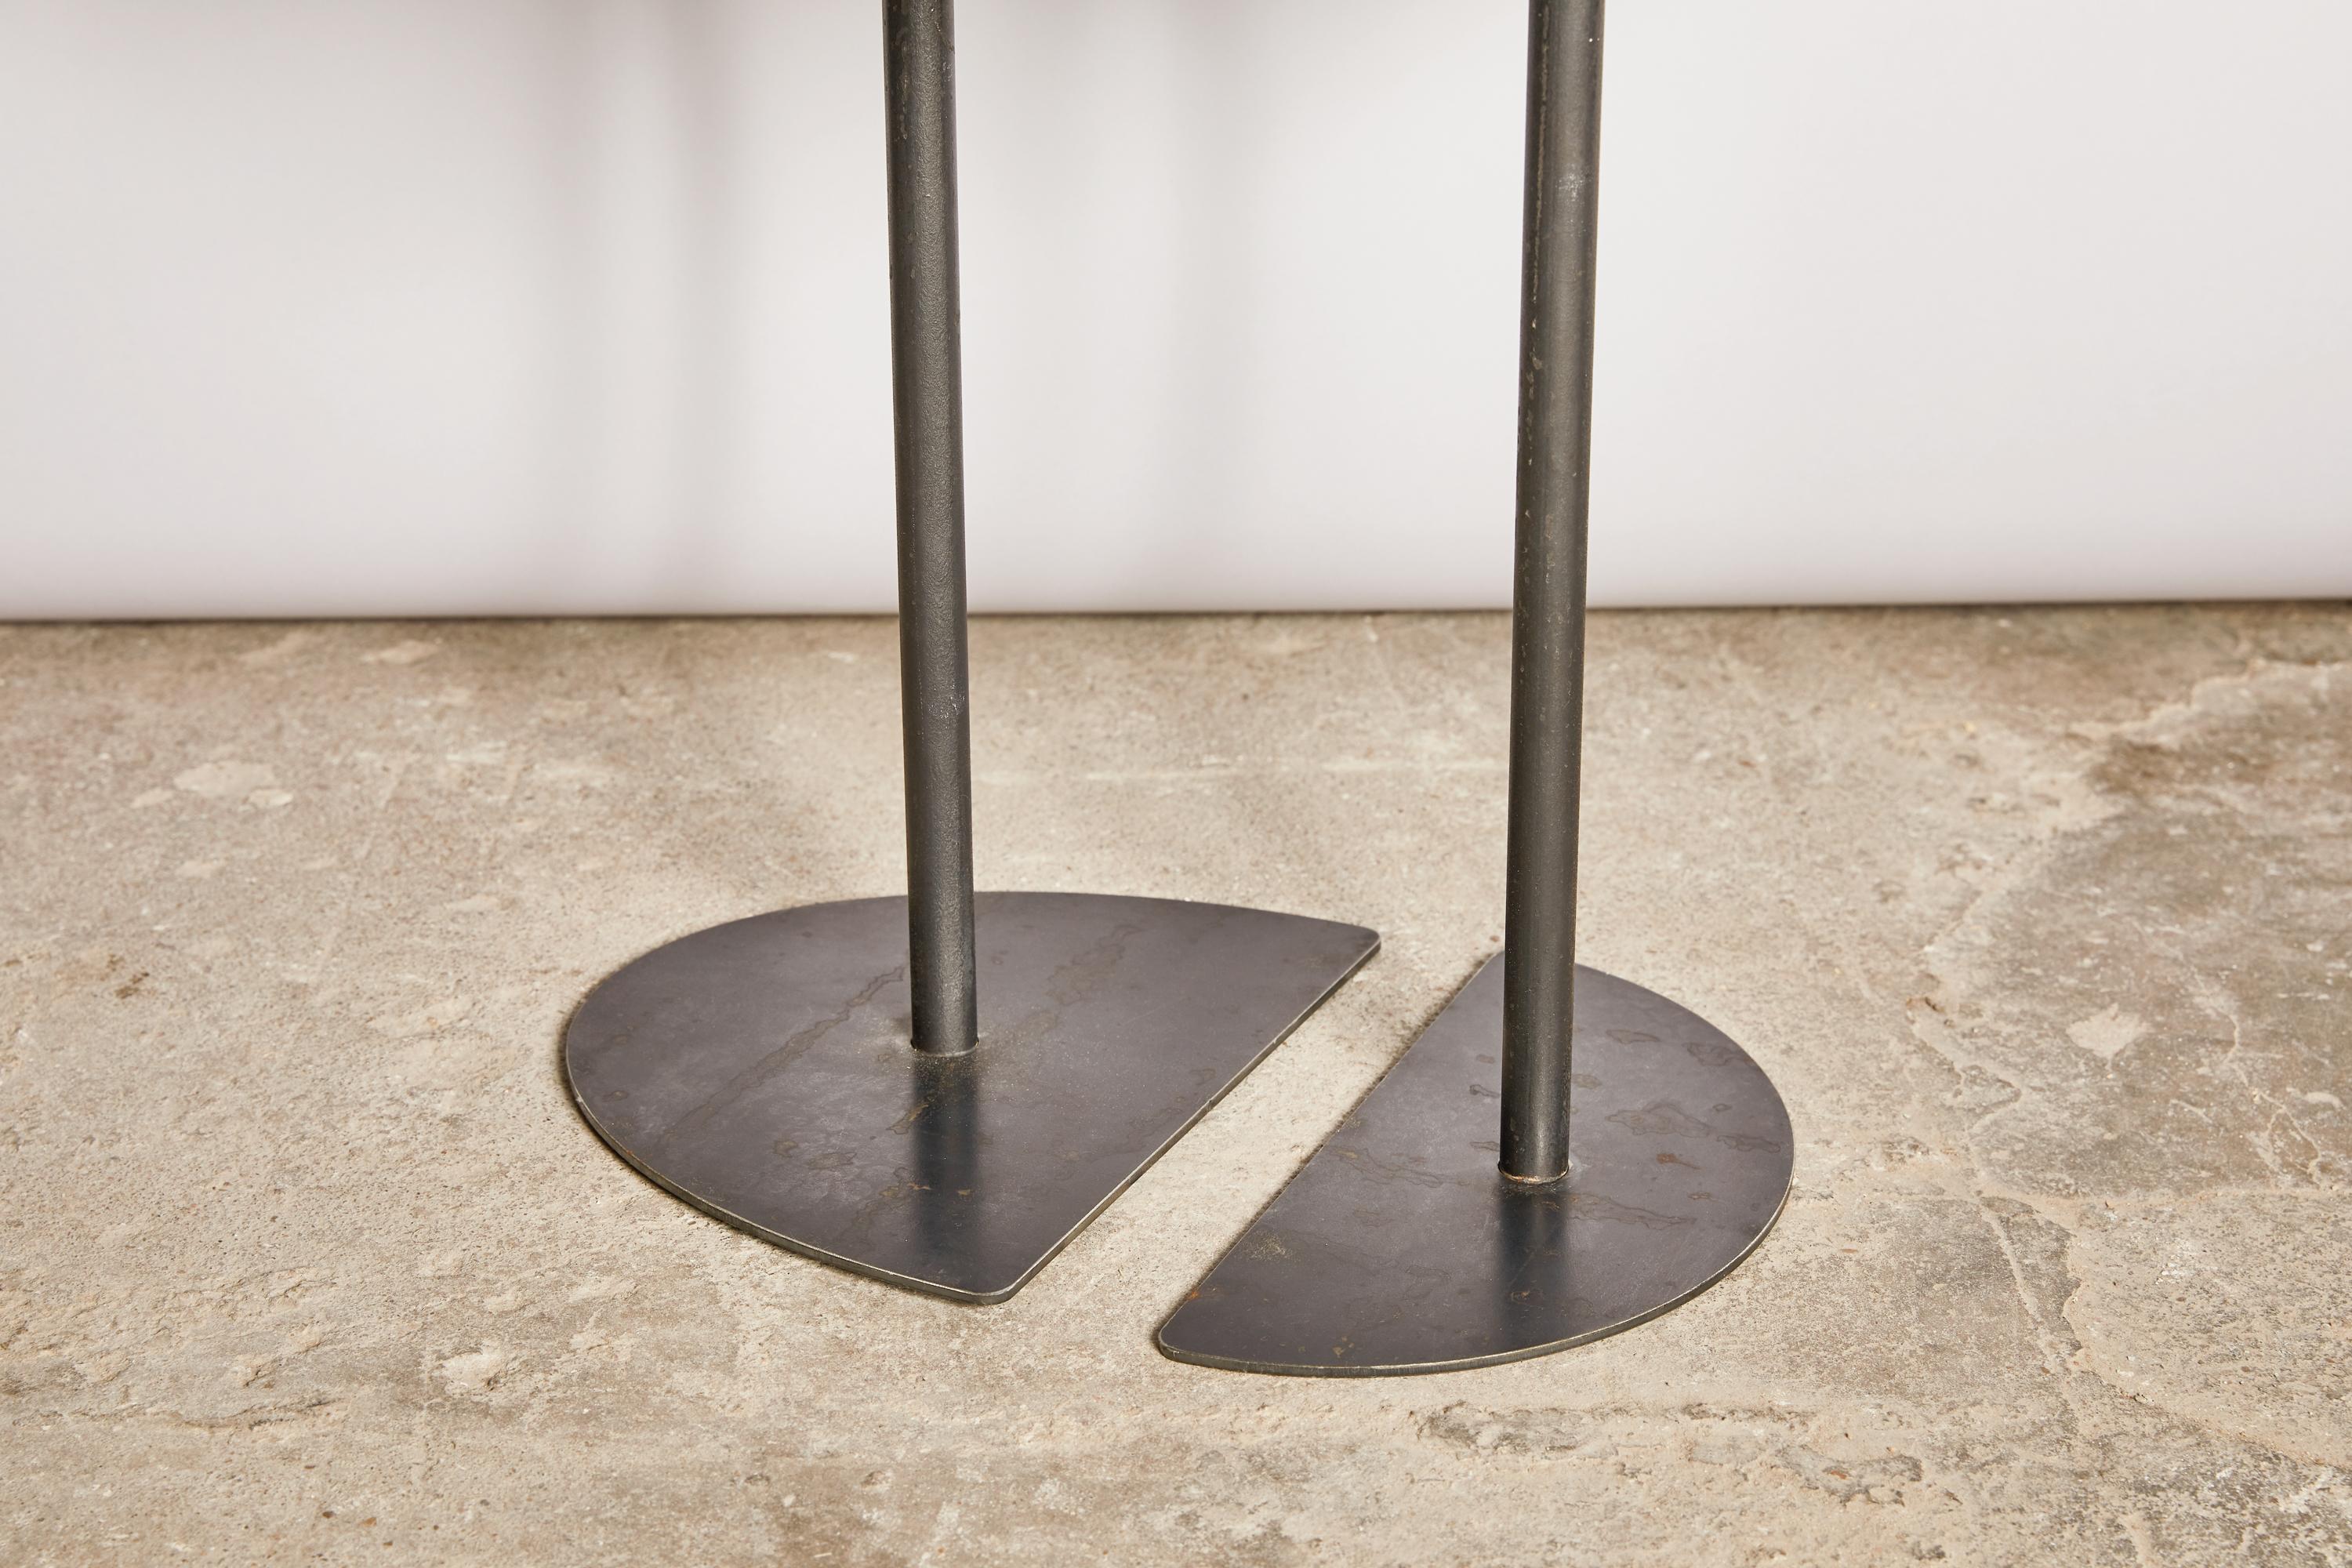 Pair of Demi-Lunes tables signed by Pia Chevalier
Also Available in Oxidized steel.
Dimensions:
Large: 60 x 27 cm H. 45 cm
Small: 40 x 18 cm H. 40 cm

Pia Chevalier is a French contemporary designer.
Independent Designer, trained in Design